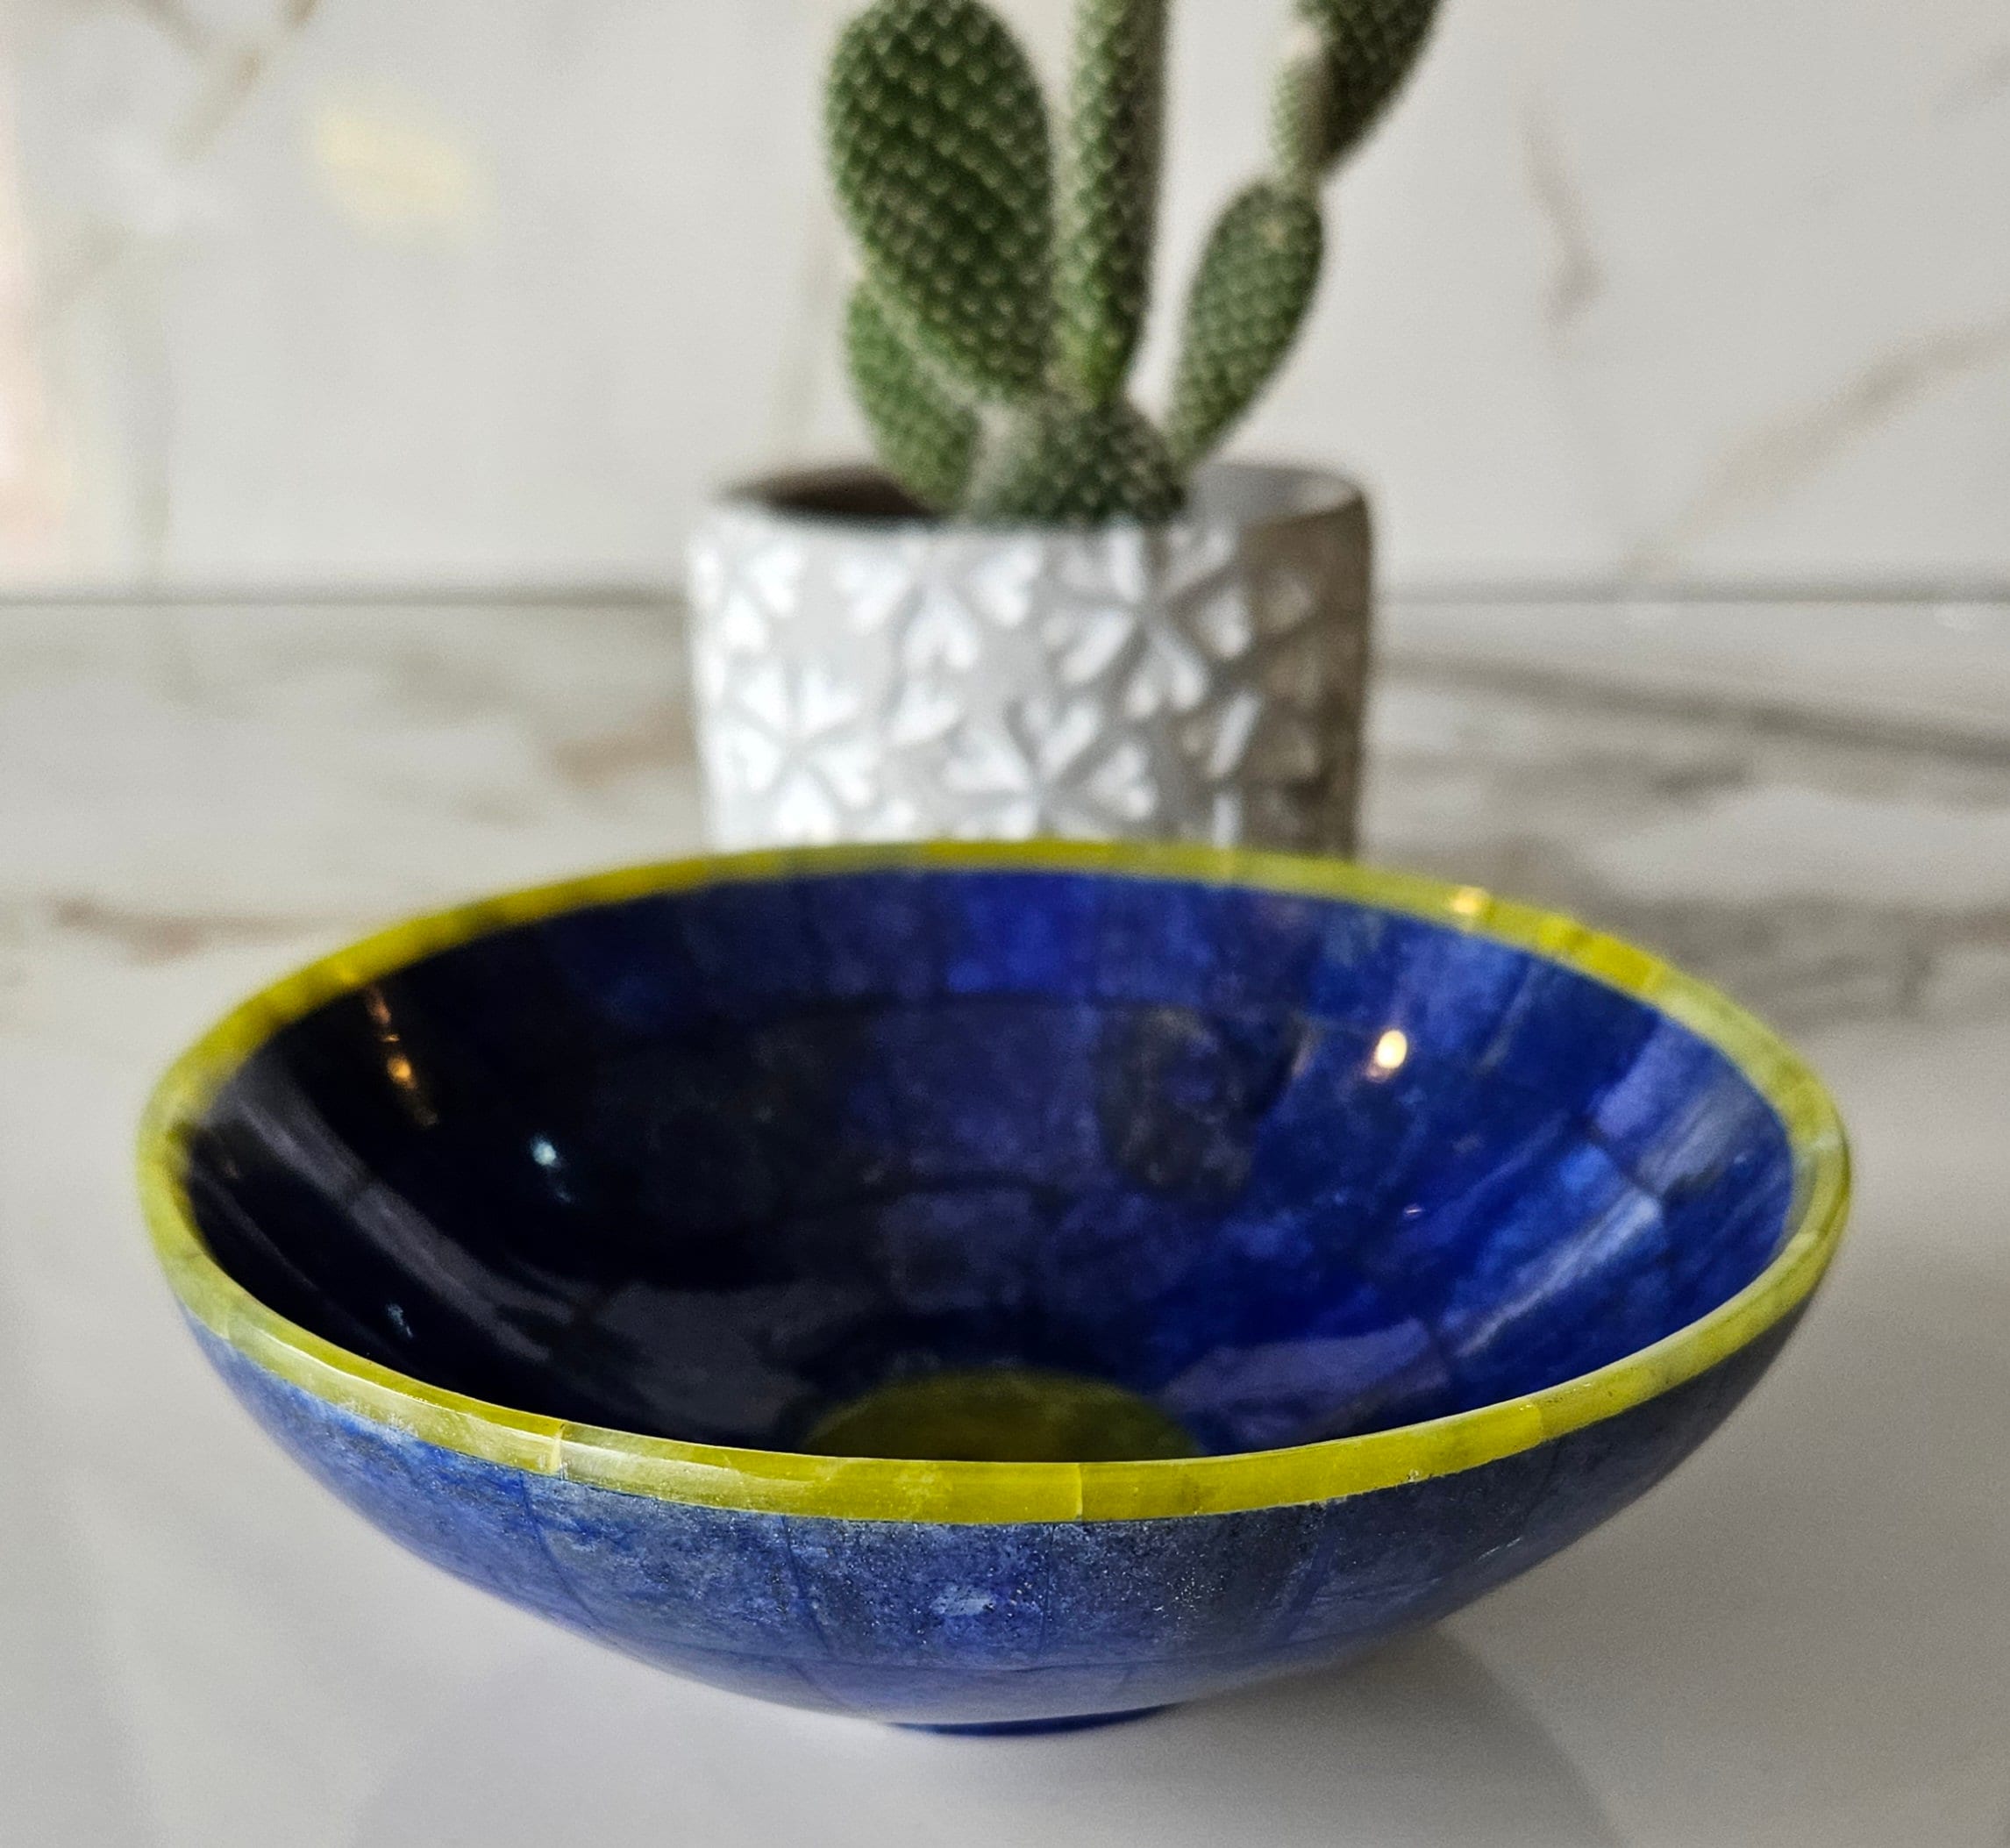 LAPIS LAZULI BOWL, Royal Blue Bowl, Handcrafted Boat Shape Polished Bowl, Desk Accessories, Crystal Gifts, loose stone, Stability, natural